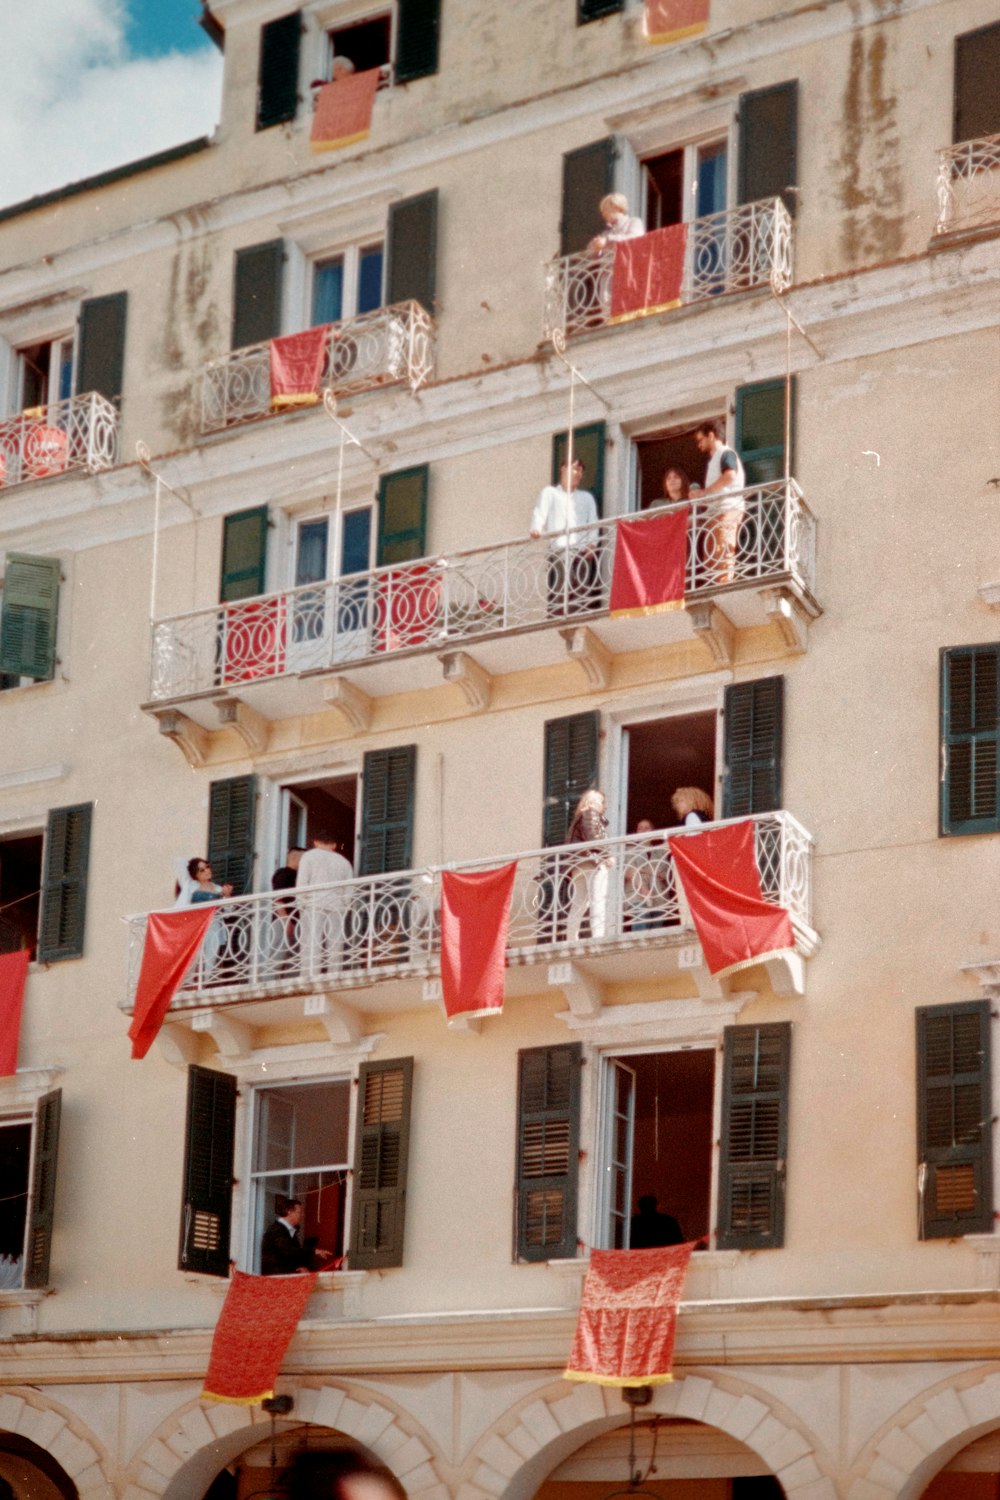 a tall building with balconies and red flags hanging from the balconies